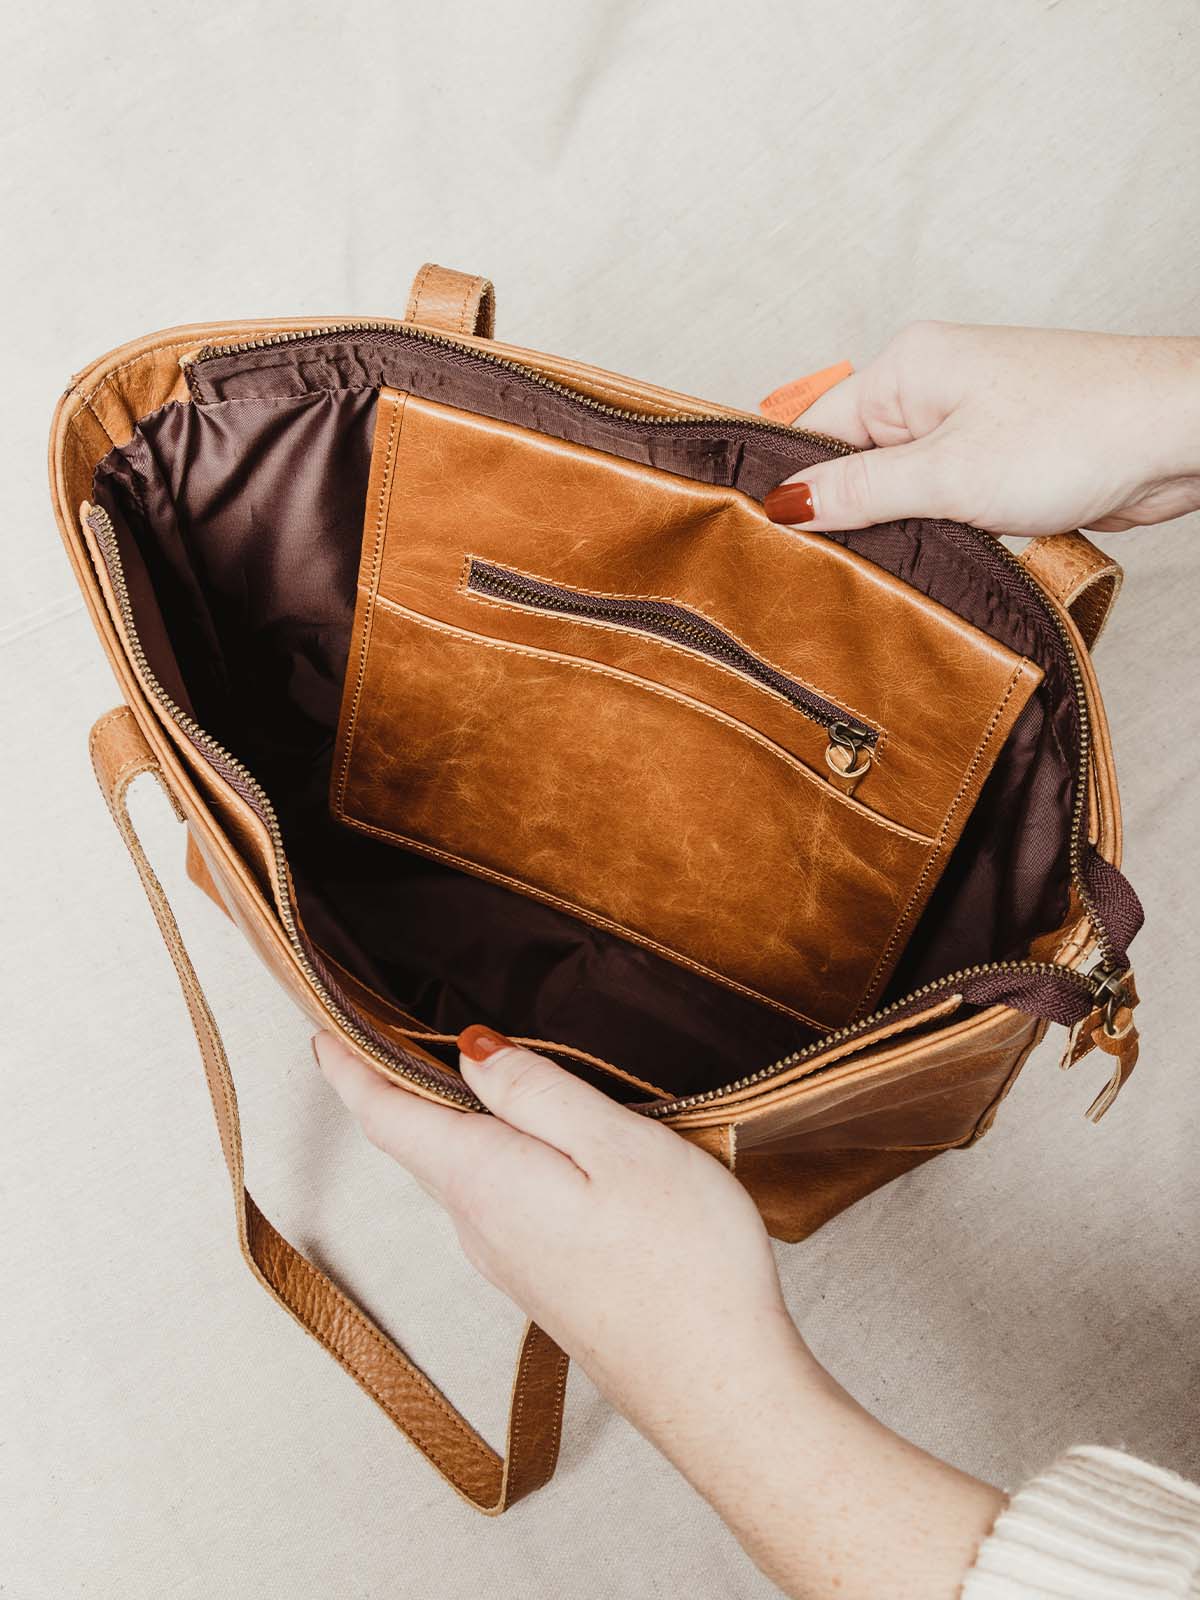 Interior closeup of the Lady's Leather Tote bag. Contains a dark brown interior lining, and hazelnut leather pouch with zipper for additional storage.